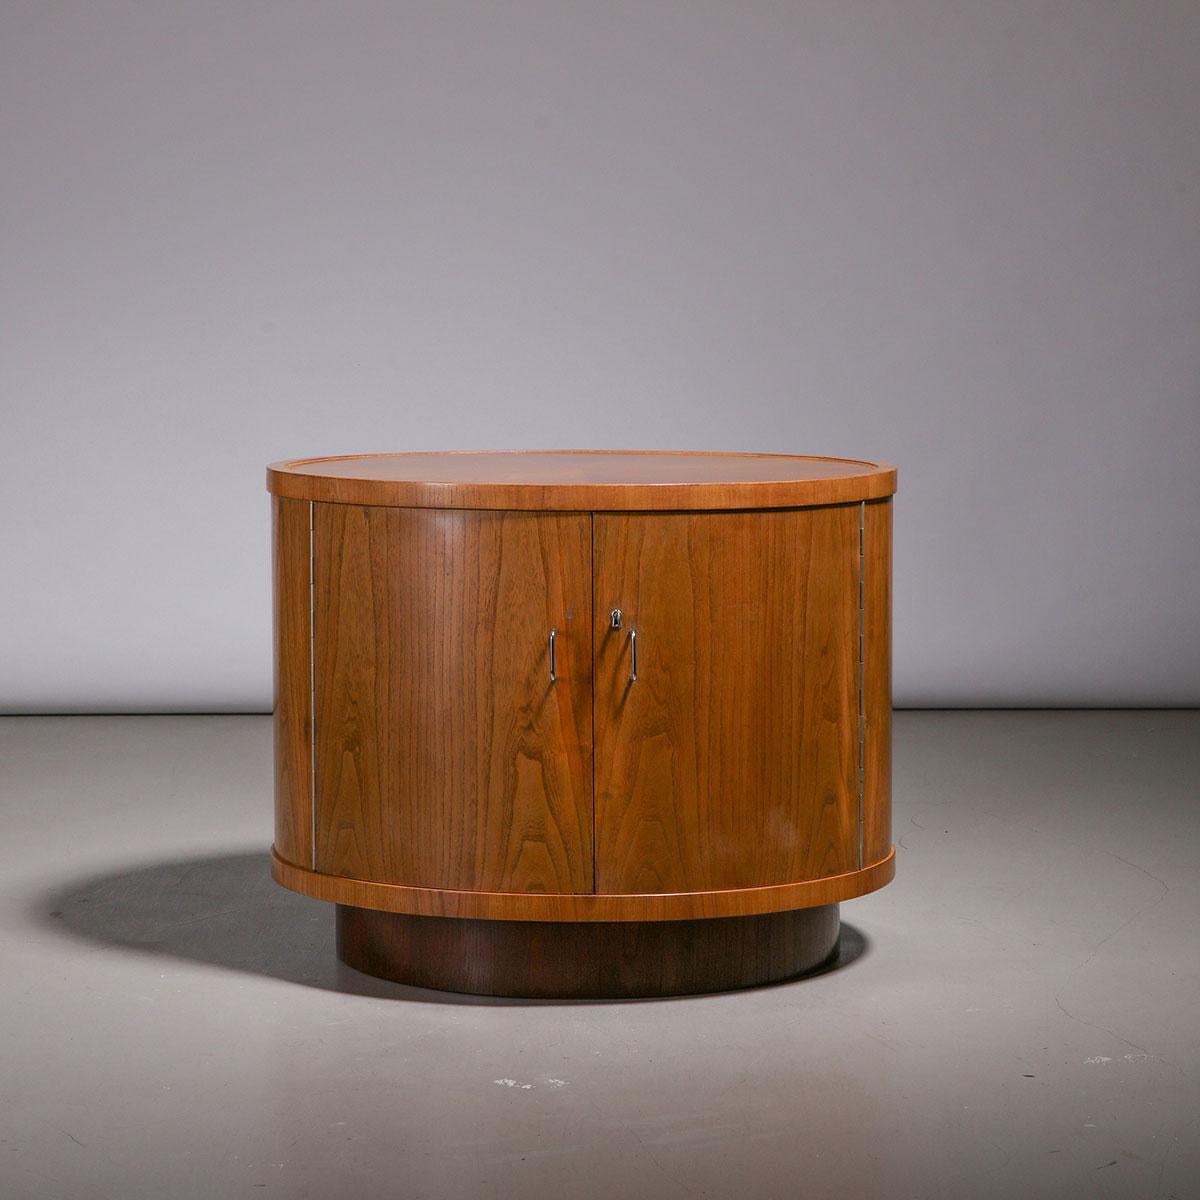 Rare rotating, double-sided oak bar cabinet, designed by Greta Magnusson-Grossman for Firma Studio in Sweden, 1930s.

Designed in the 1930s by renowned Swedish designer Greta Magnusson-Grossman for her own company, Firma Studio, this very rare and